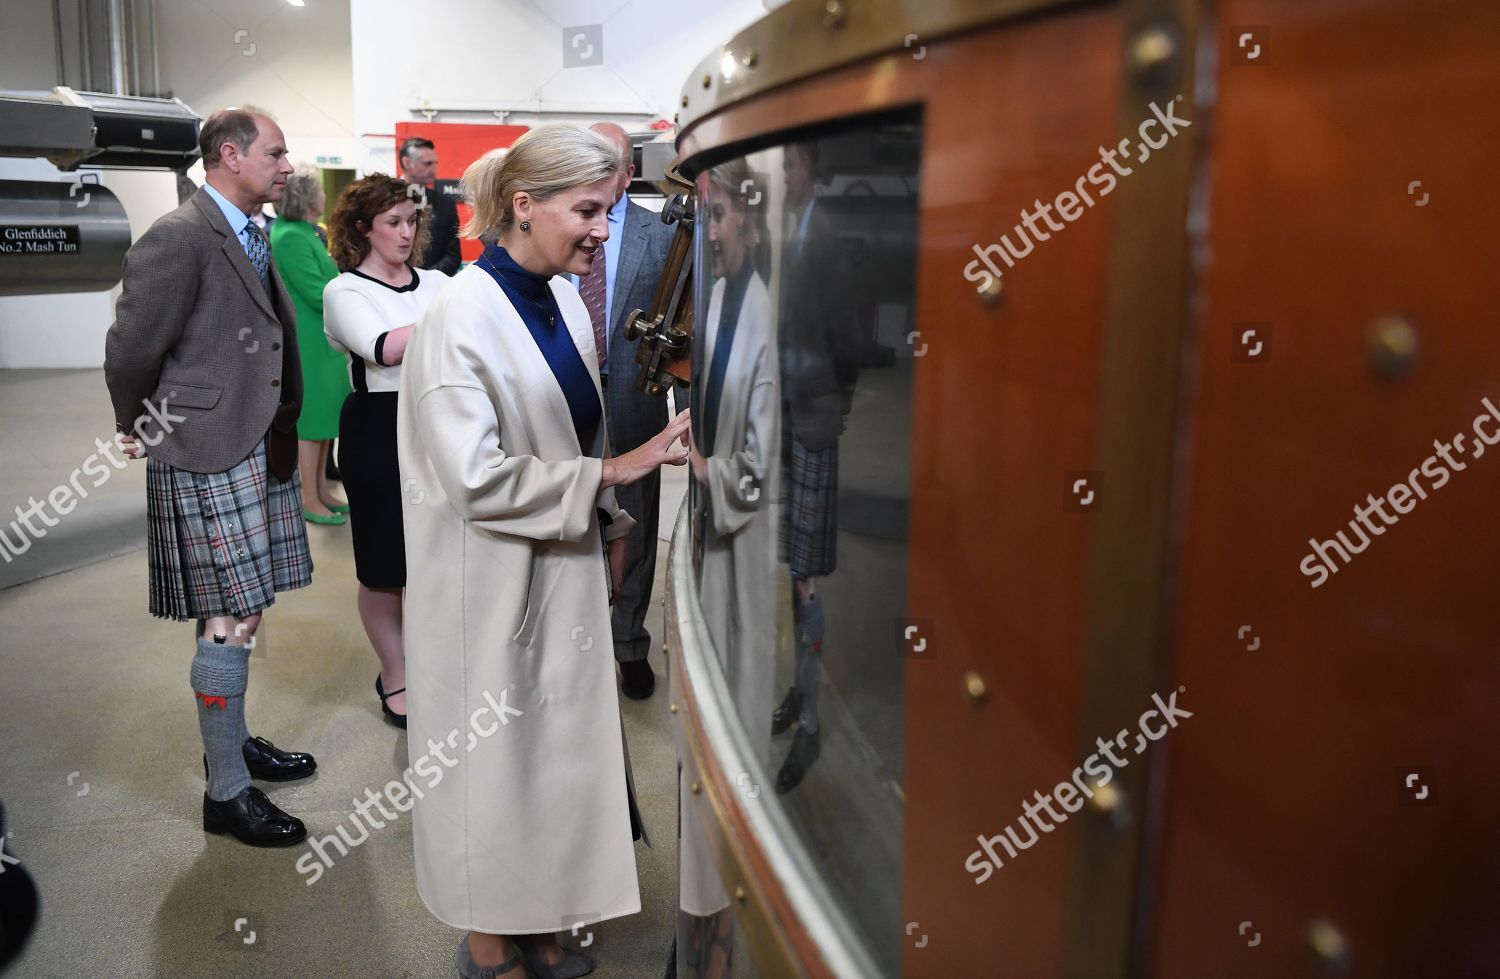 sophie-countess-of-wessex-and-prince-edward-visit-to-scotland-uk-shutterstock-editorial-10326116n.jpg